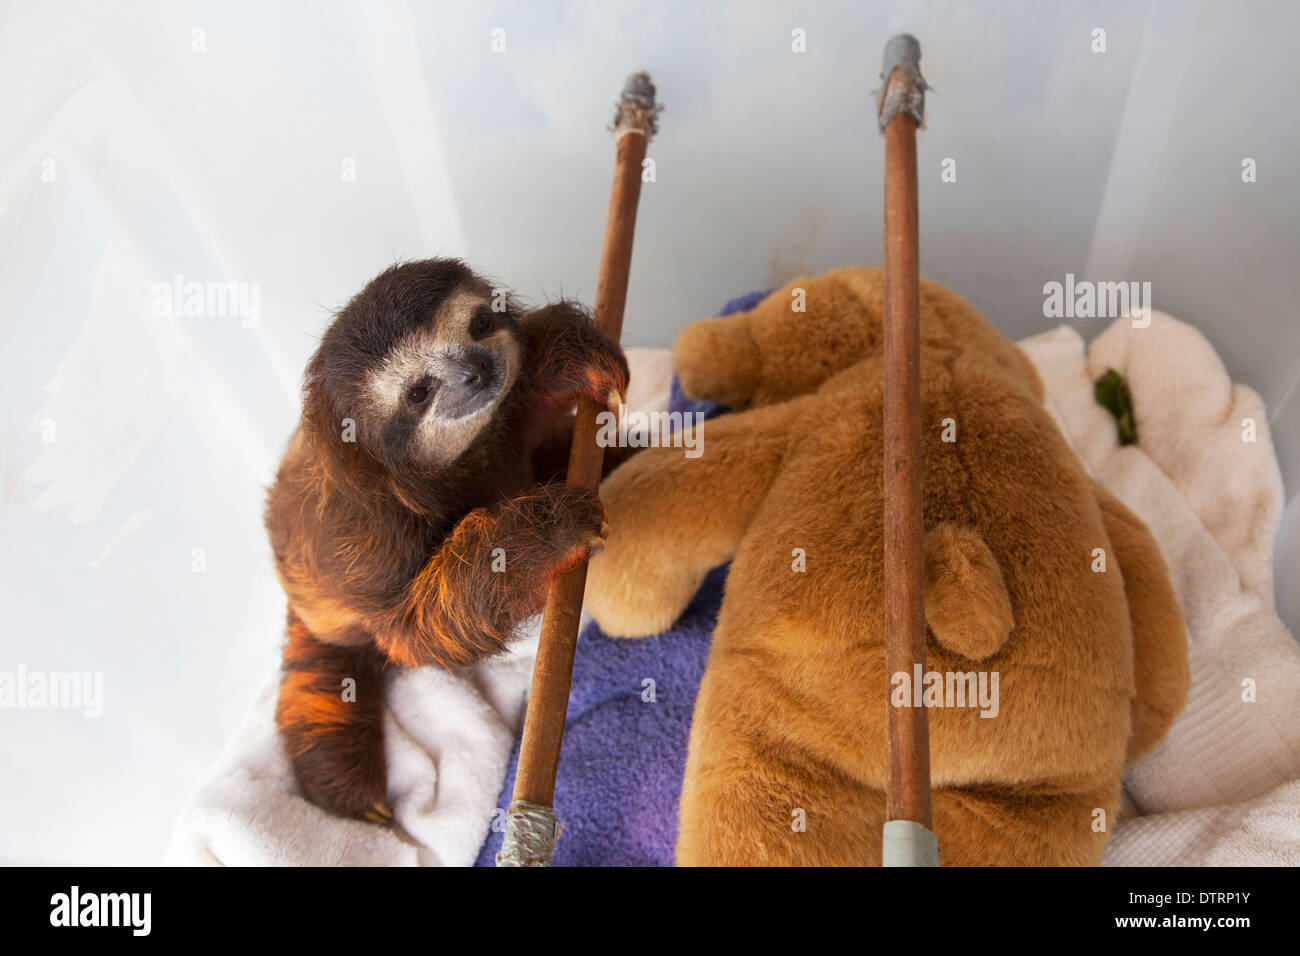 Baby Brown-throated Three-toed Sloth (Bradypus variegatus) in nursery at the Sloth Sanctuary Stock Photo